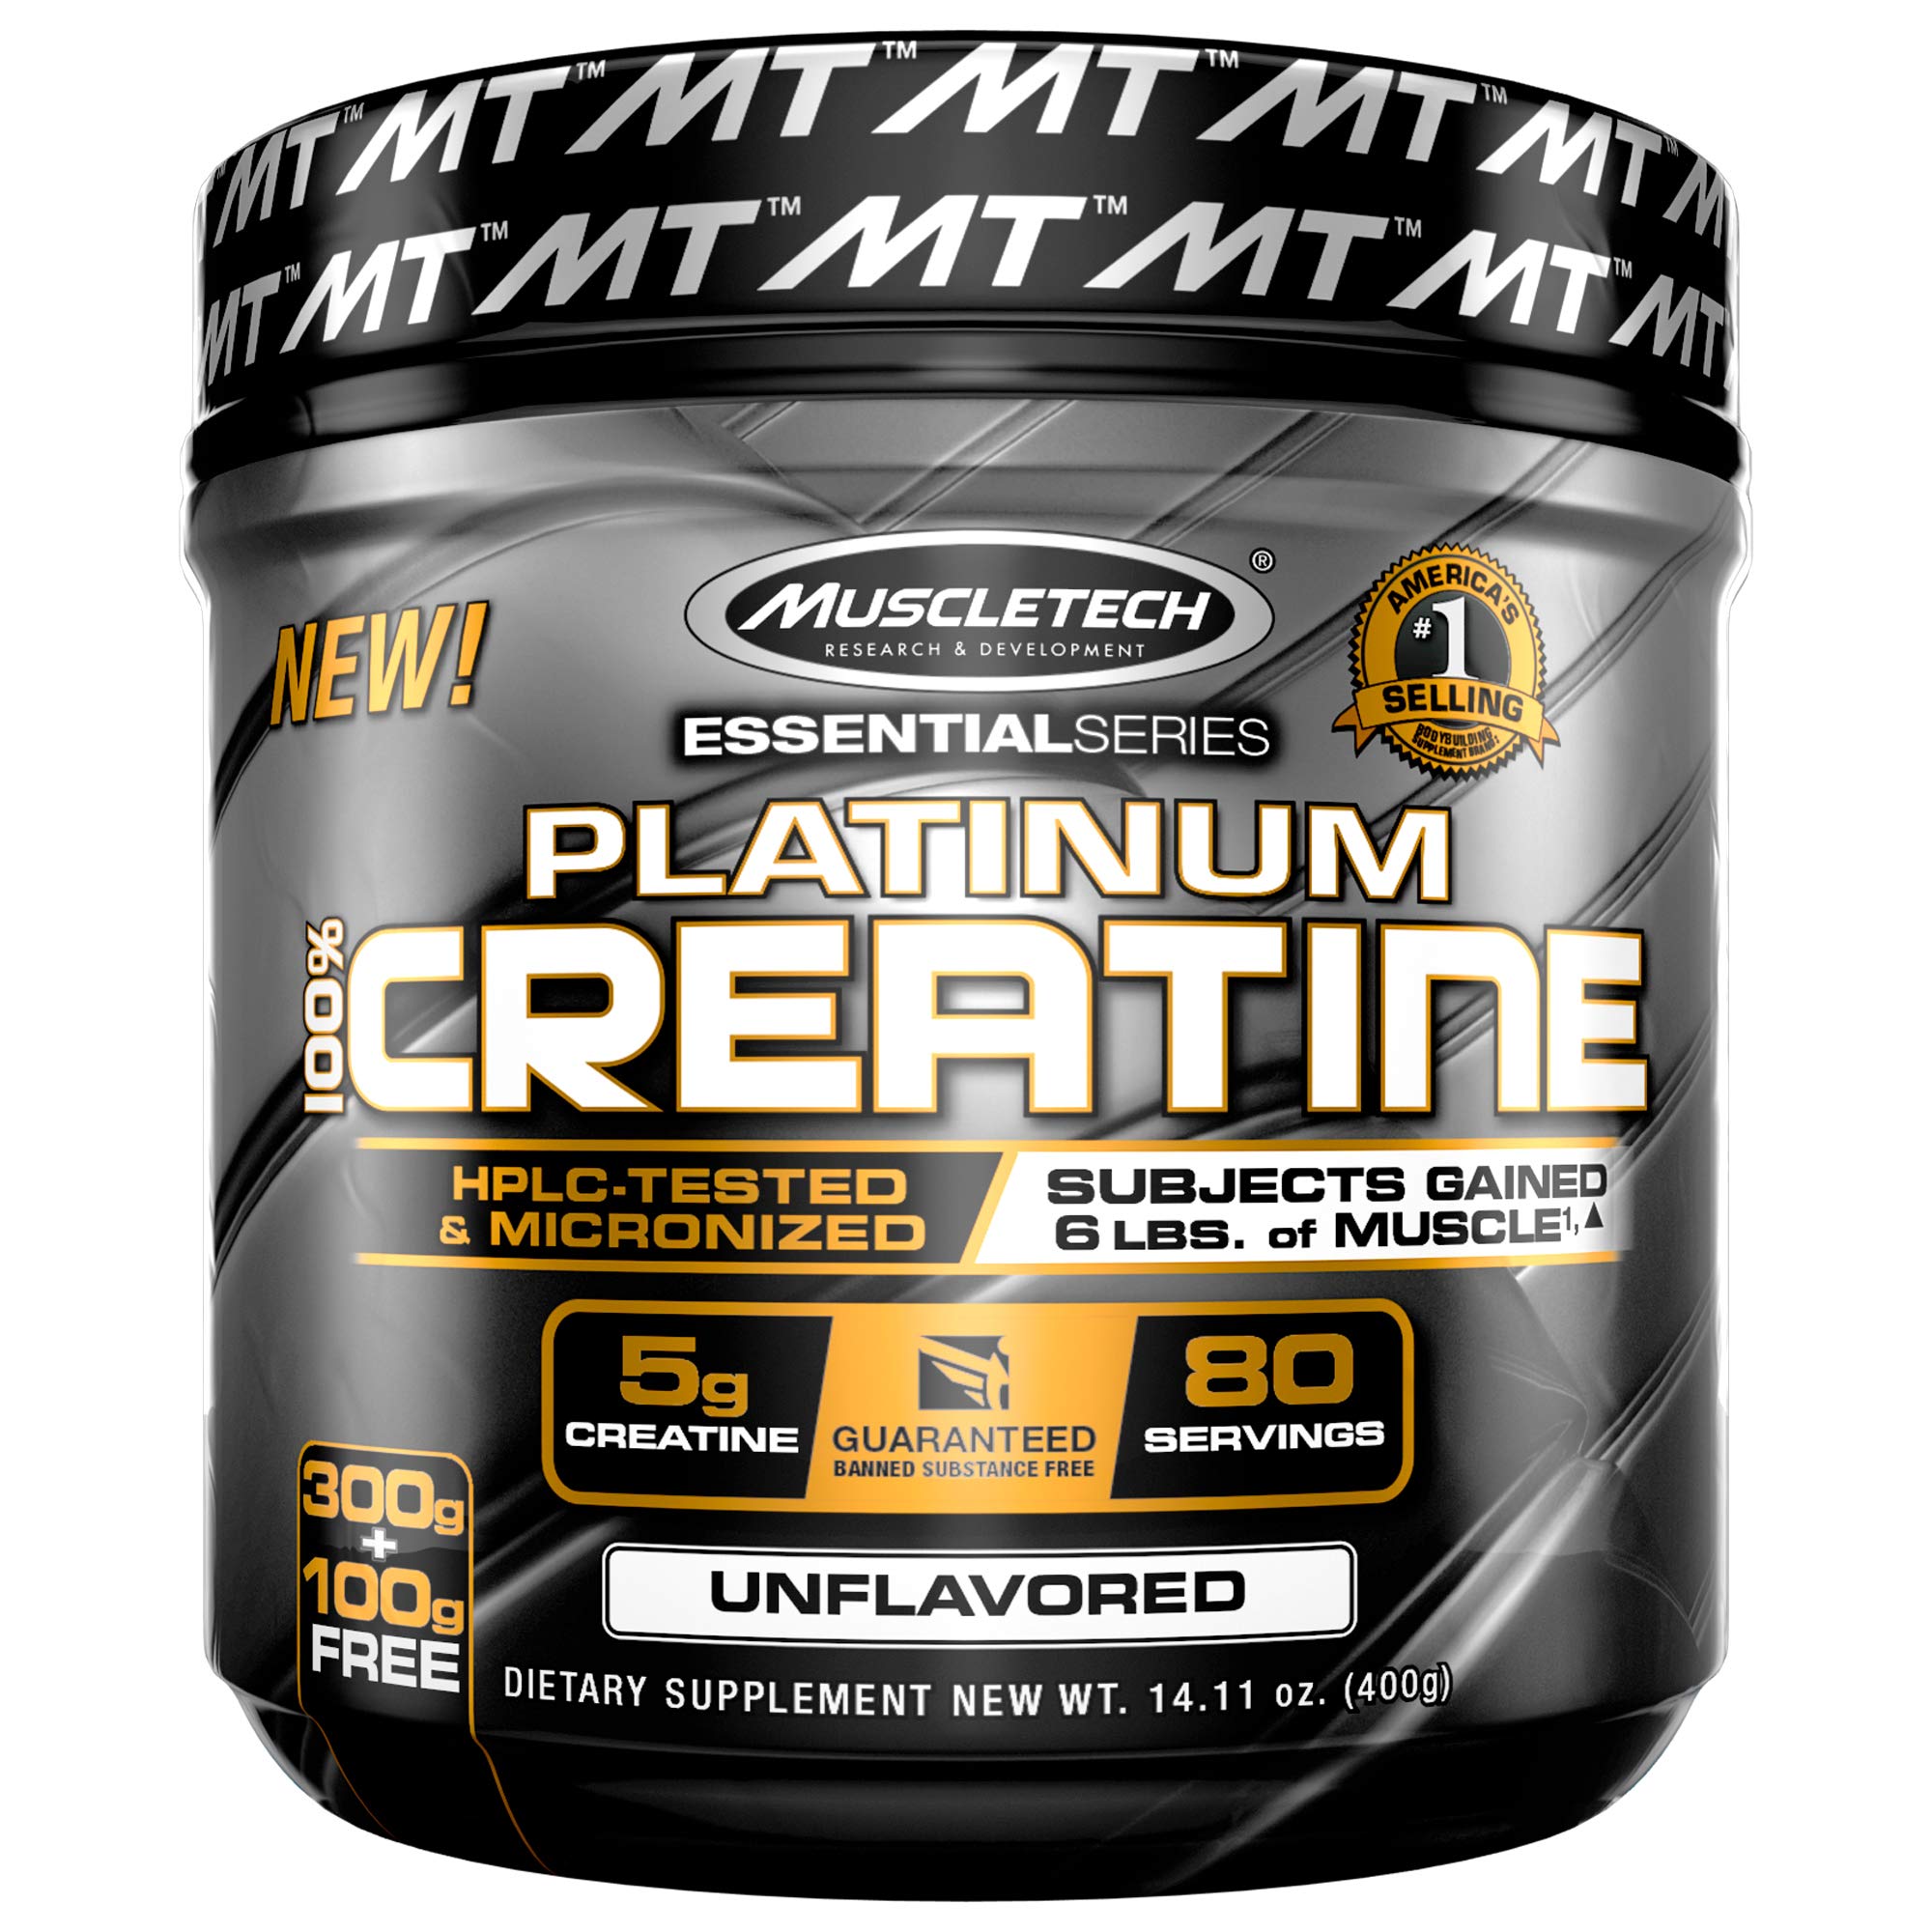 MuscleTech Creatine Monohydrate Powder Platinum Pure Micronized Muscle Recovery + Builder & Cellucor C4 Sport Pre Workout Powder Watermelon - Pre Workout Energy with Creatine